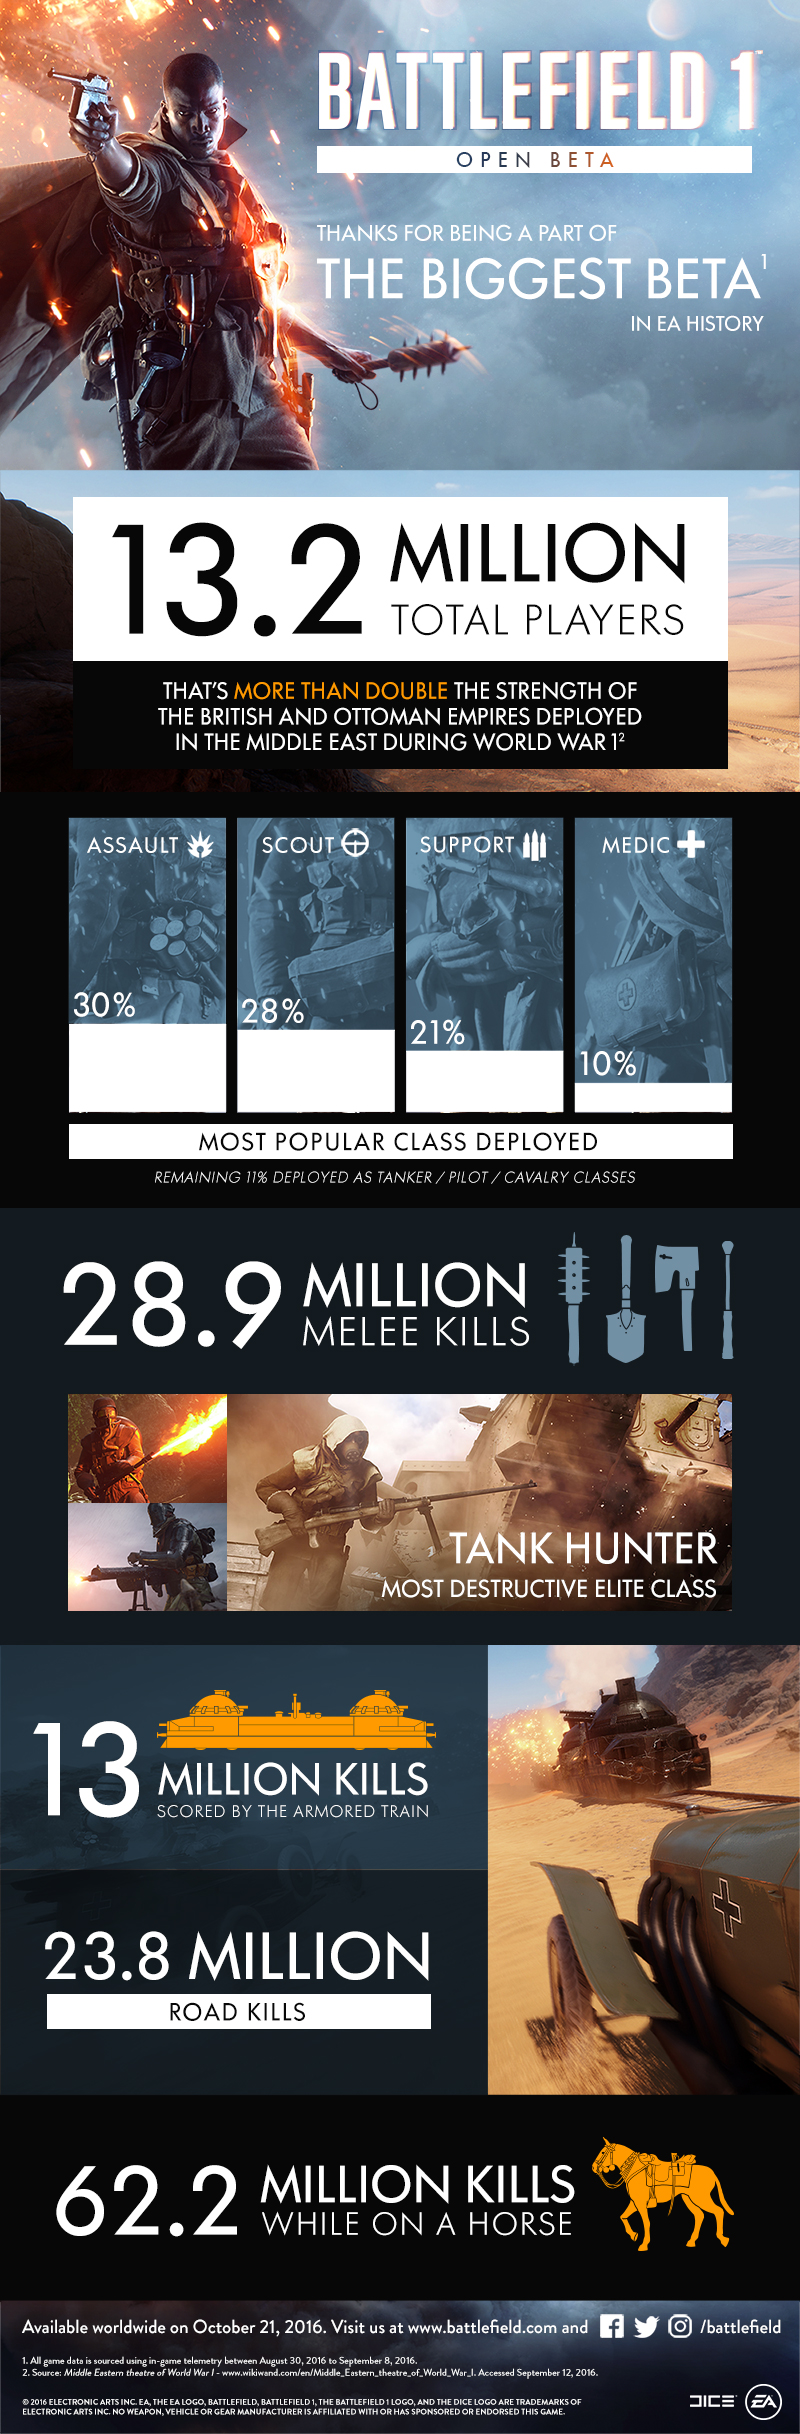 bf1-betainfographic_final1